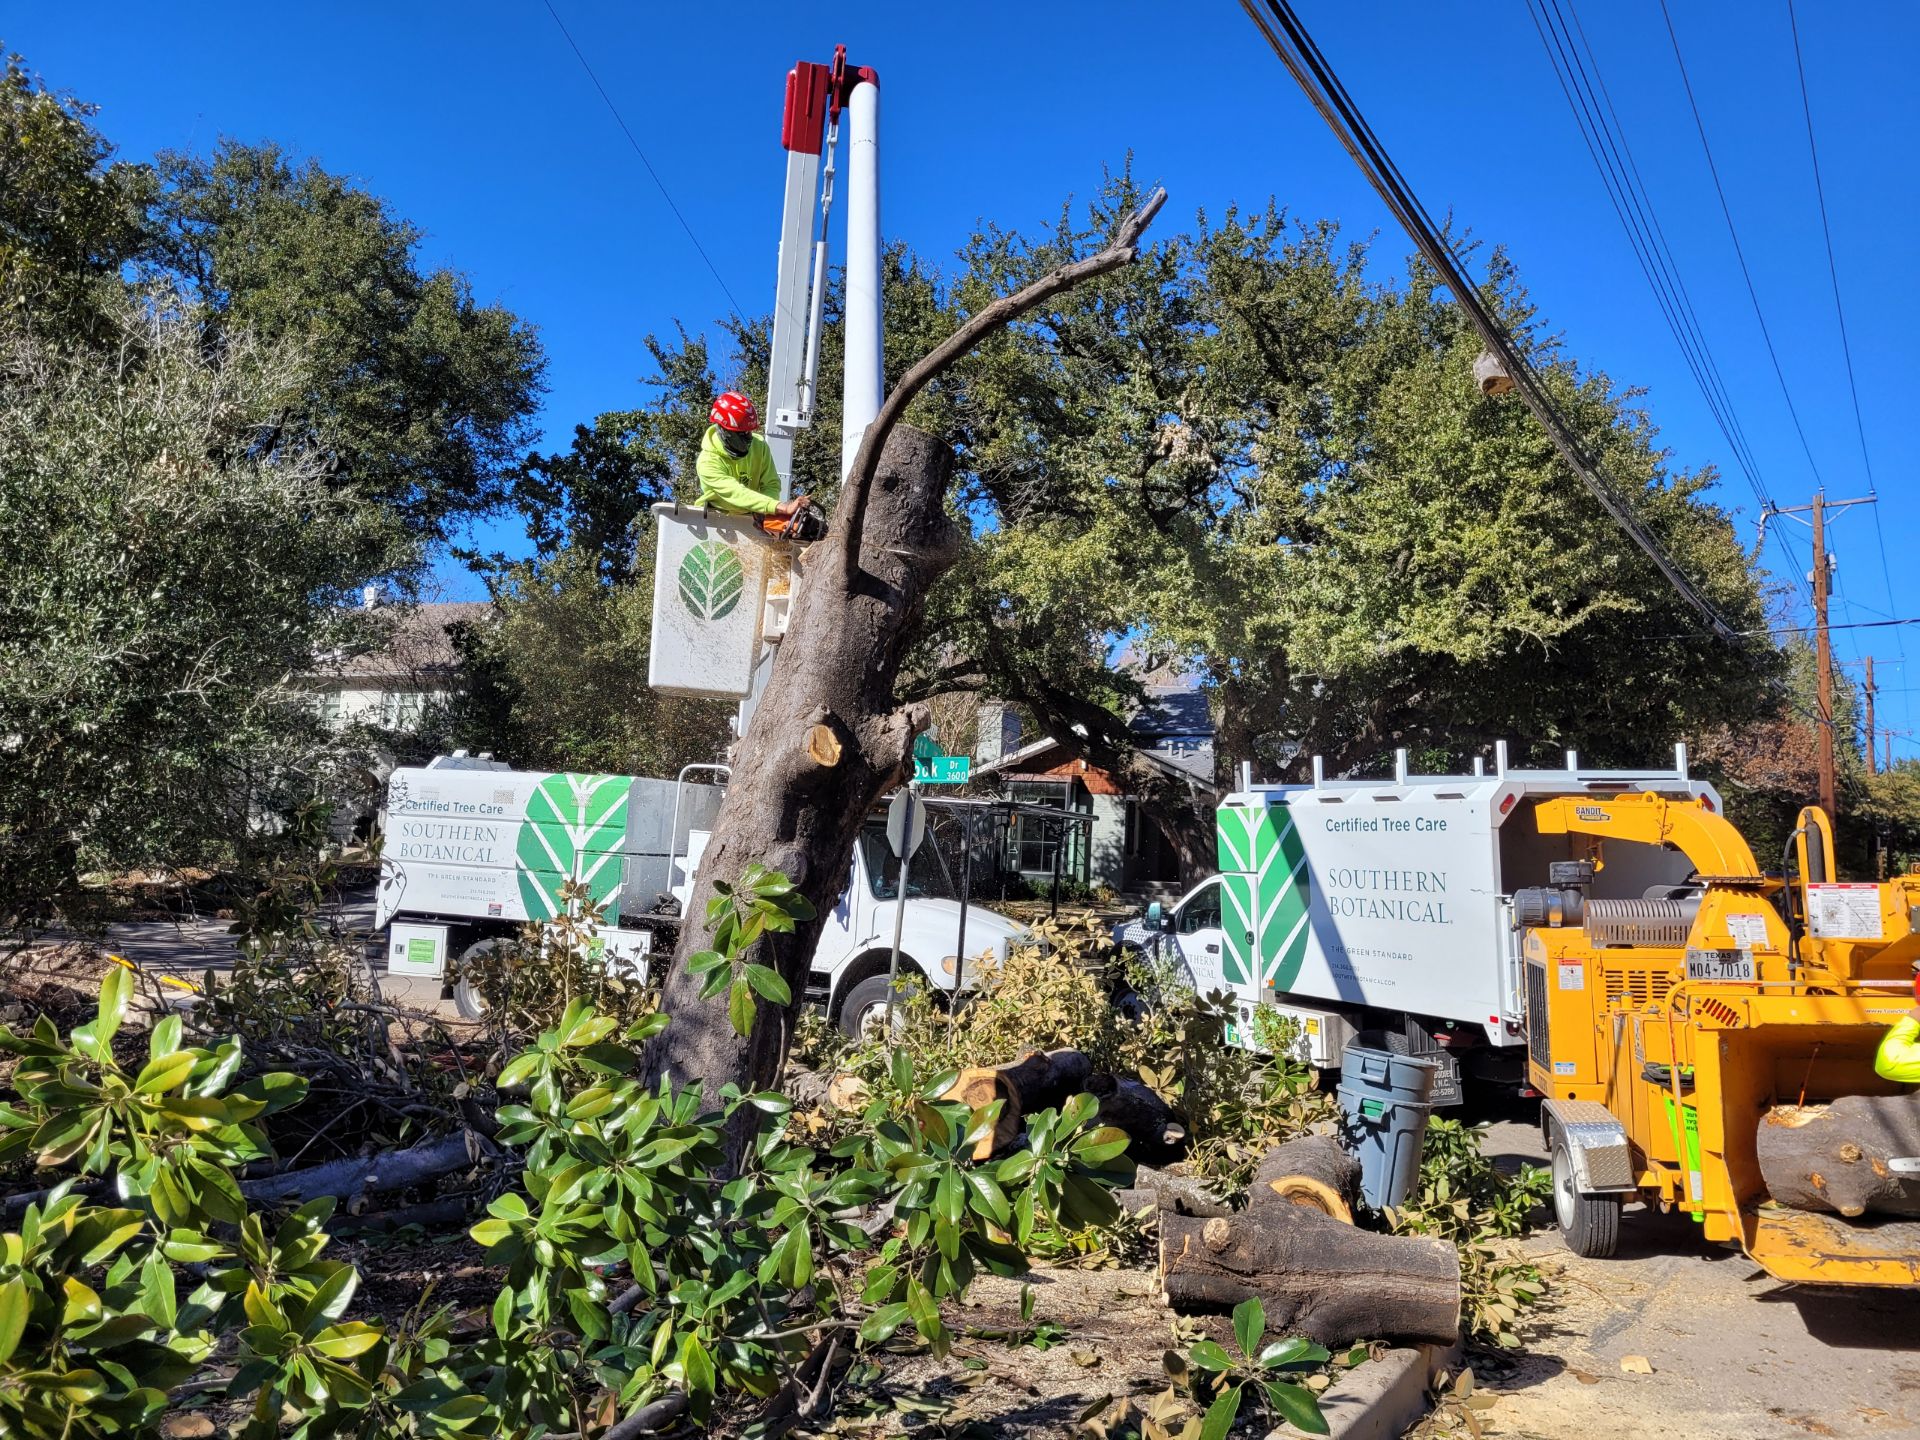 Emergency Tree Services | Southern Botanical